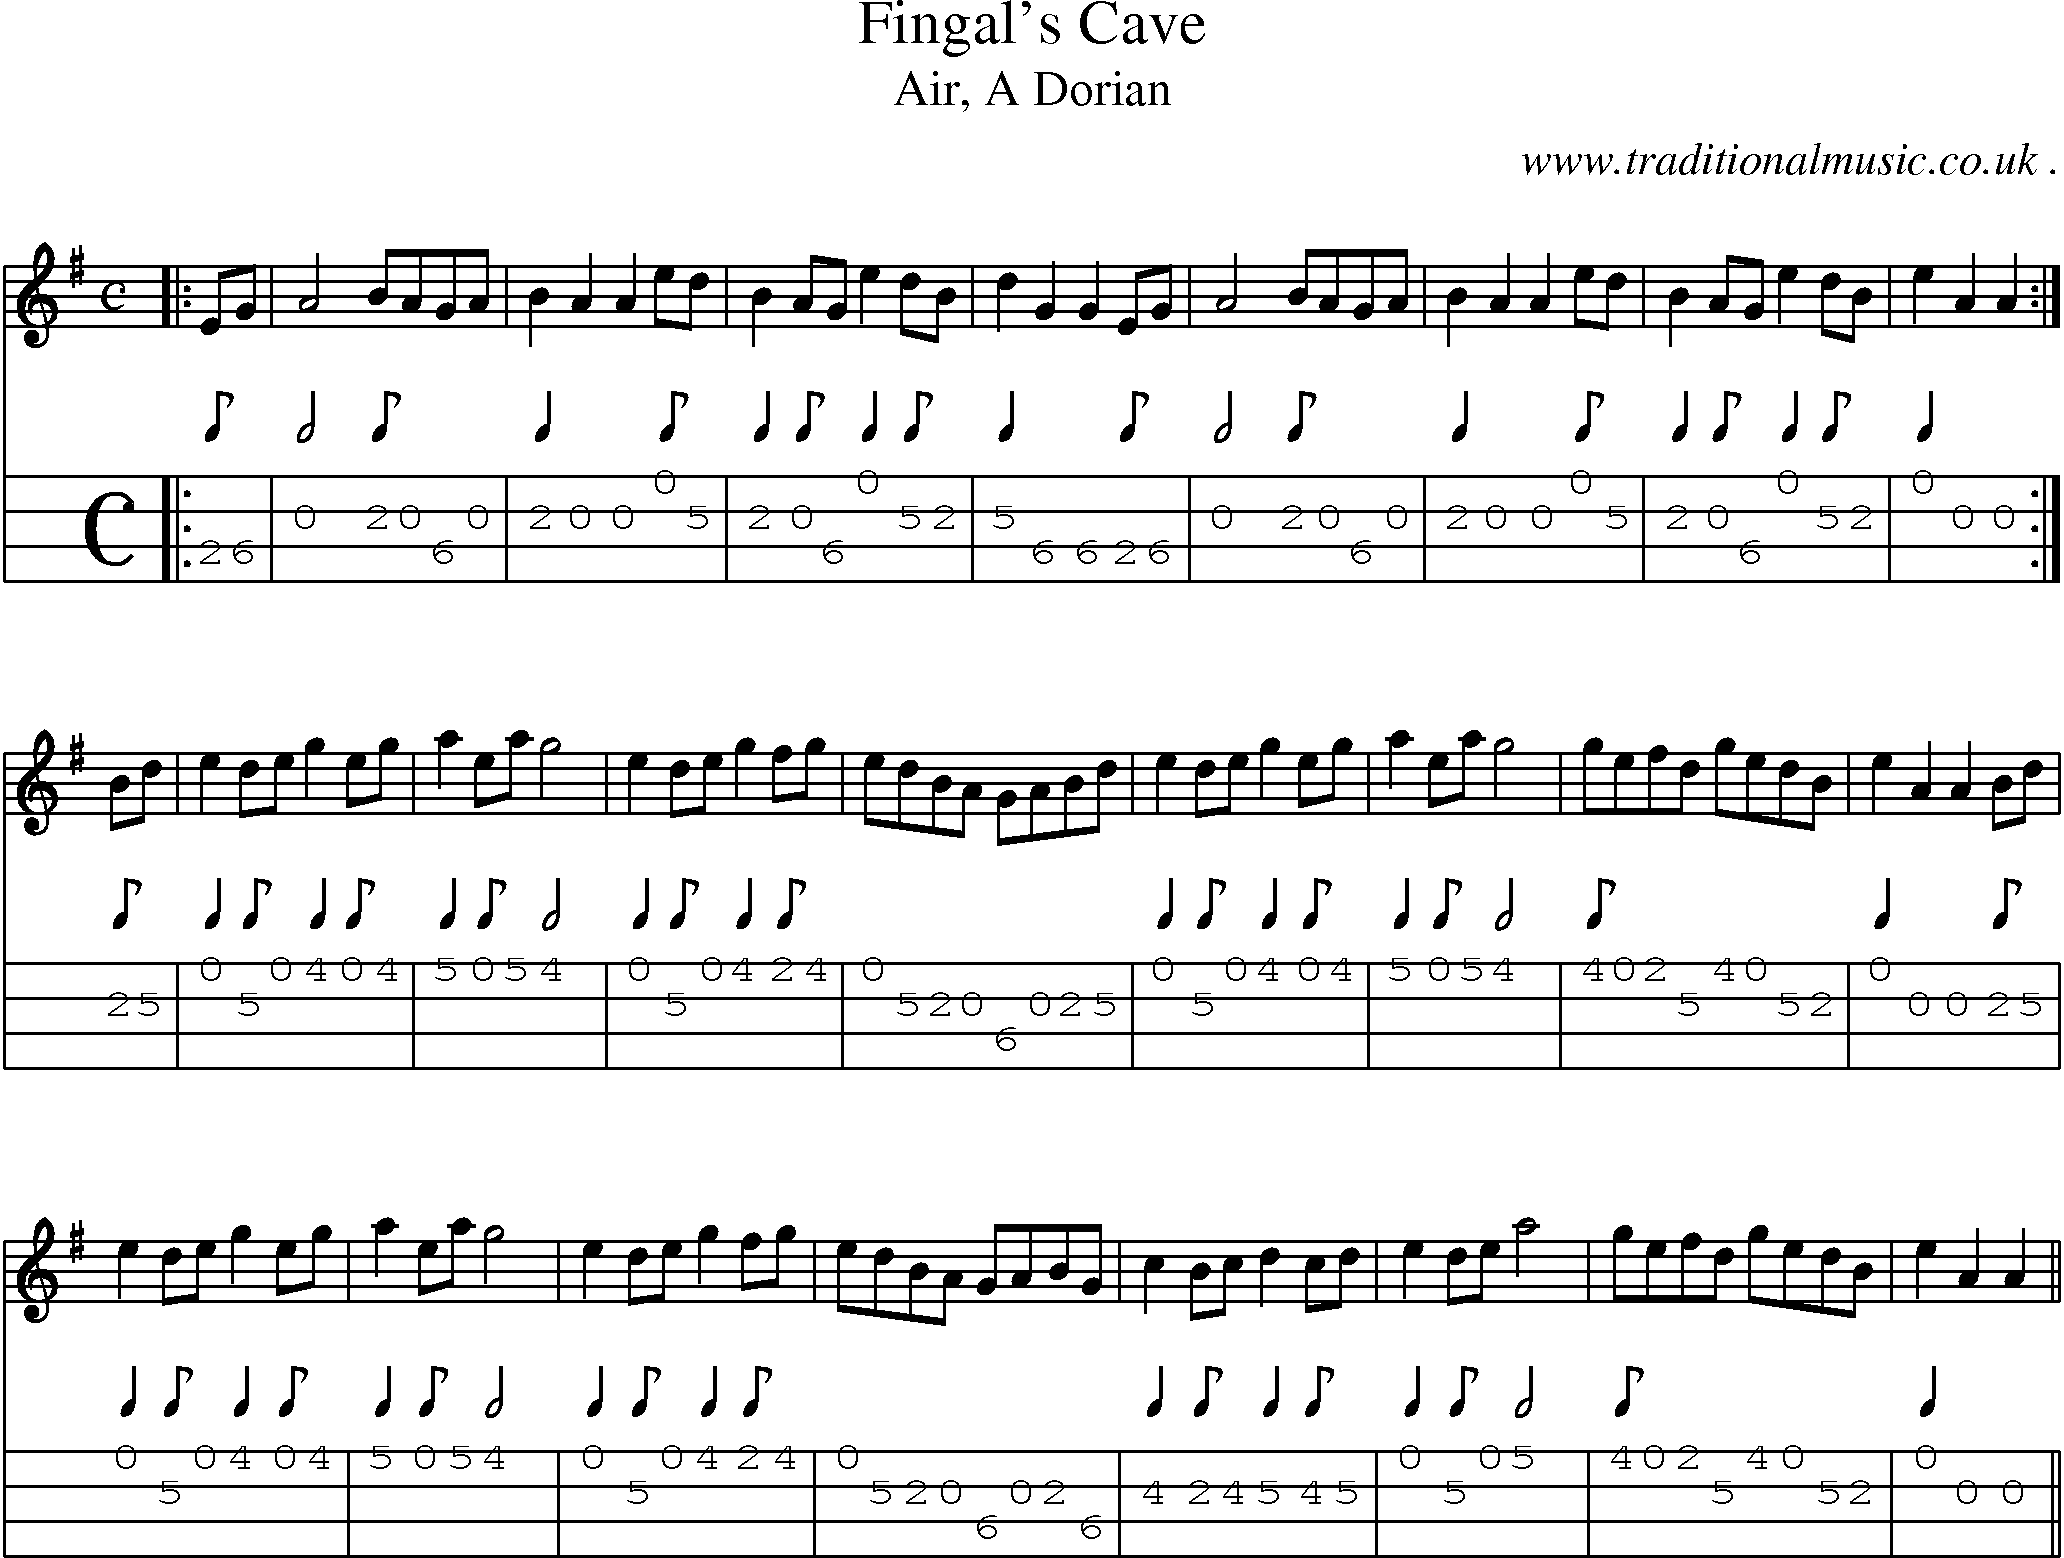 Sheet-music  score, Chords and Mandolin Tabs for Fingals Cave